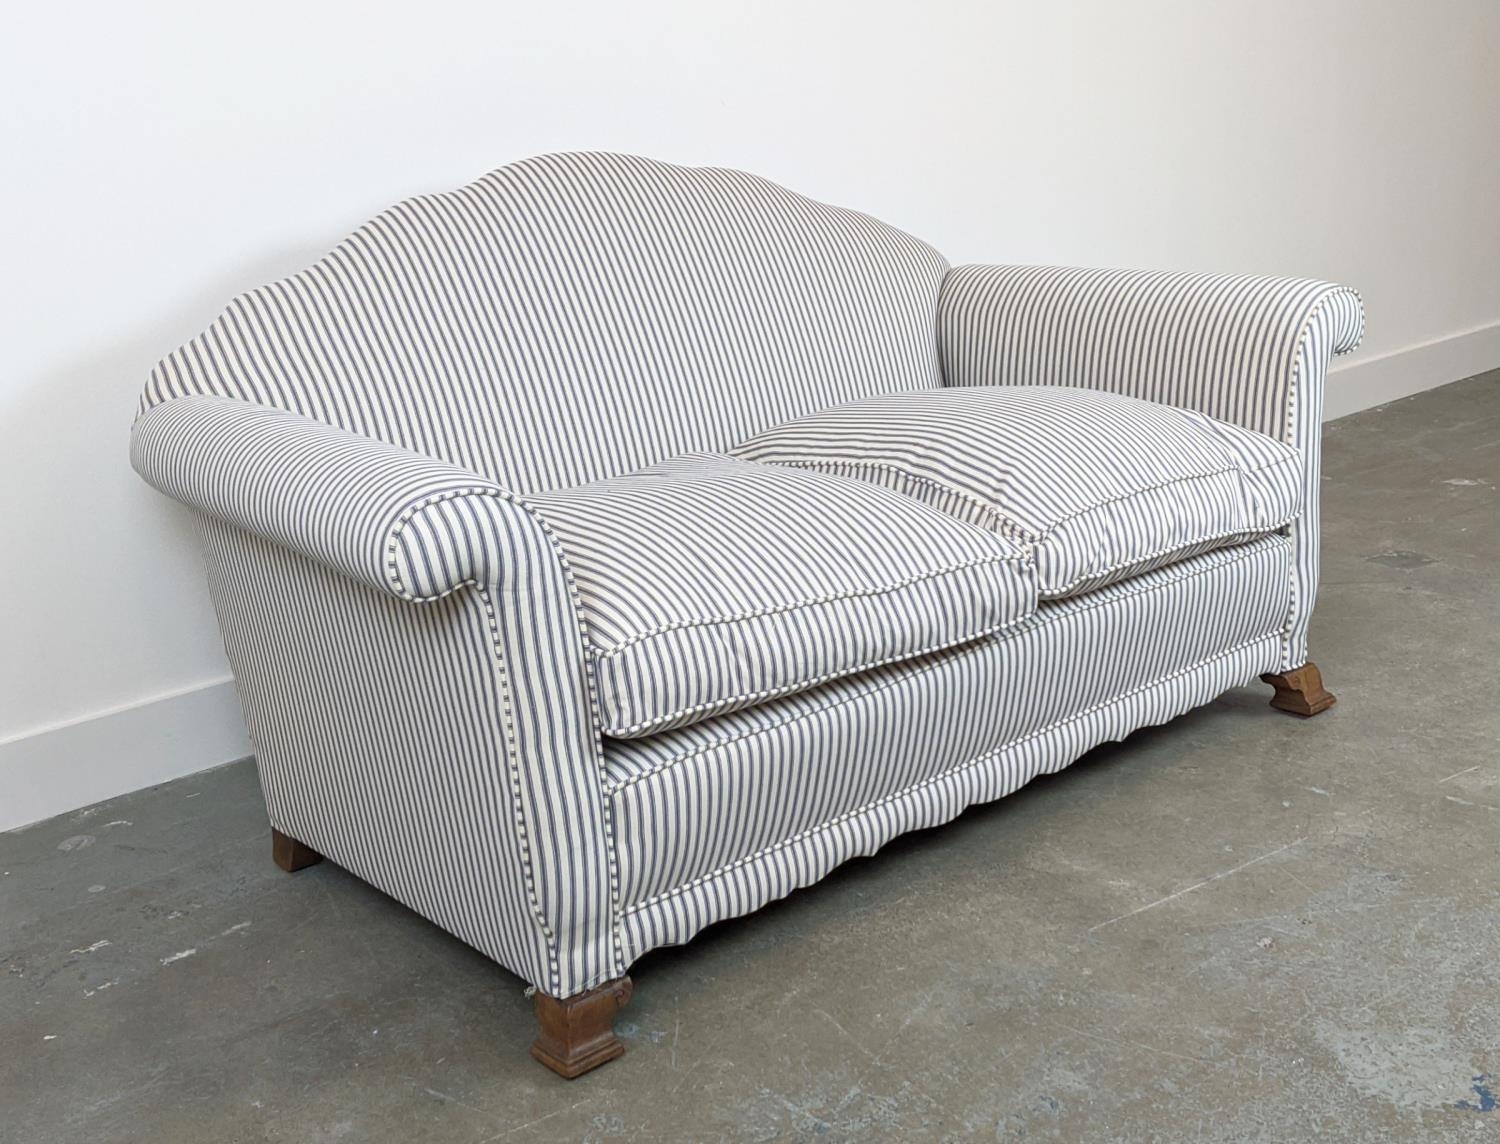 SOFA, early 20th century walnut in new ticking upholstery, 80cm H x 154cm. - Image 3 of 6